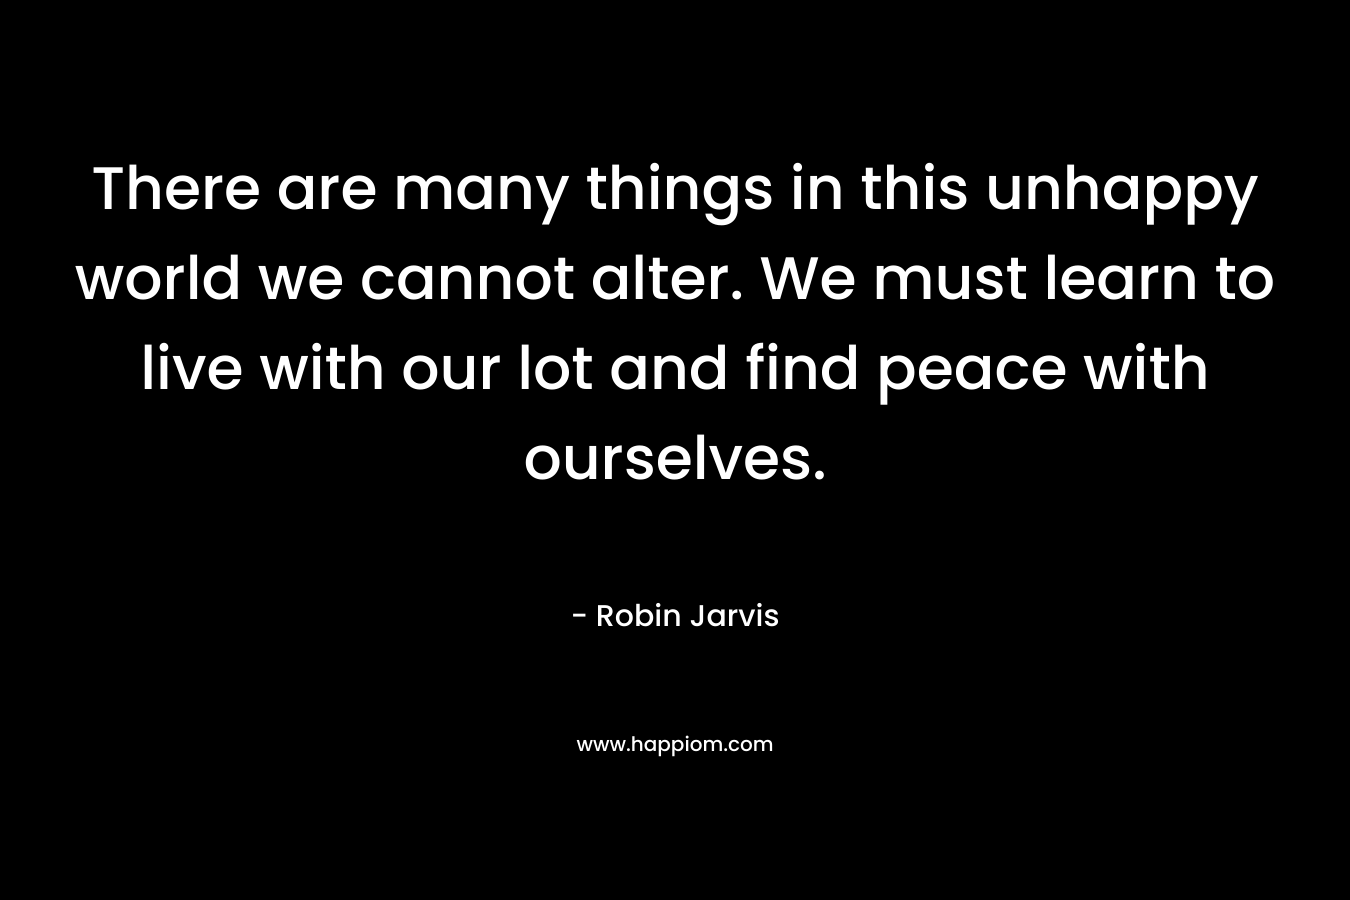 There are many things in this unhappy world we cannot alter. We must learn to live with our lot and find peace with ourselves. – Robin Jarvis